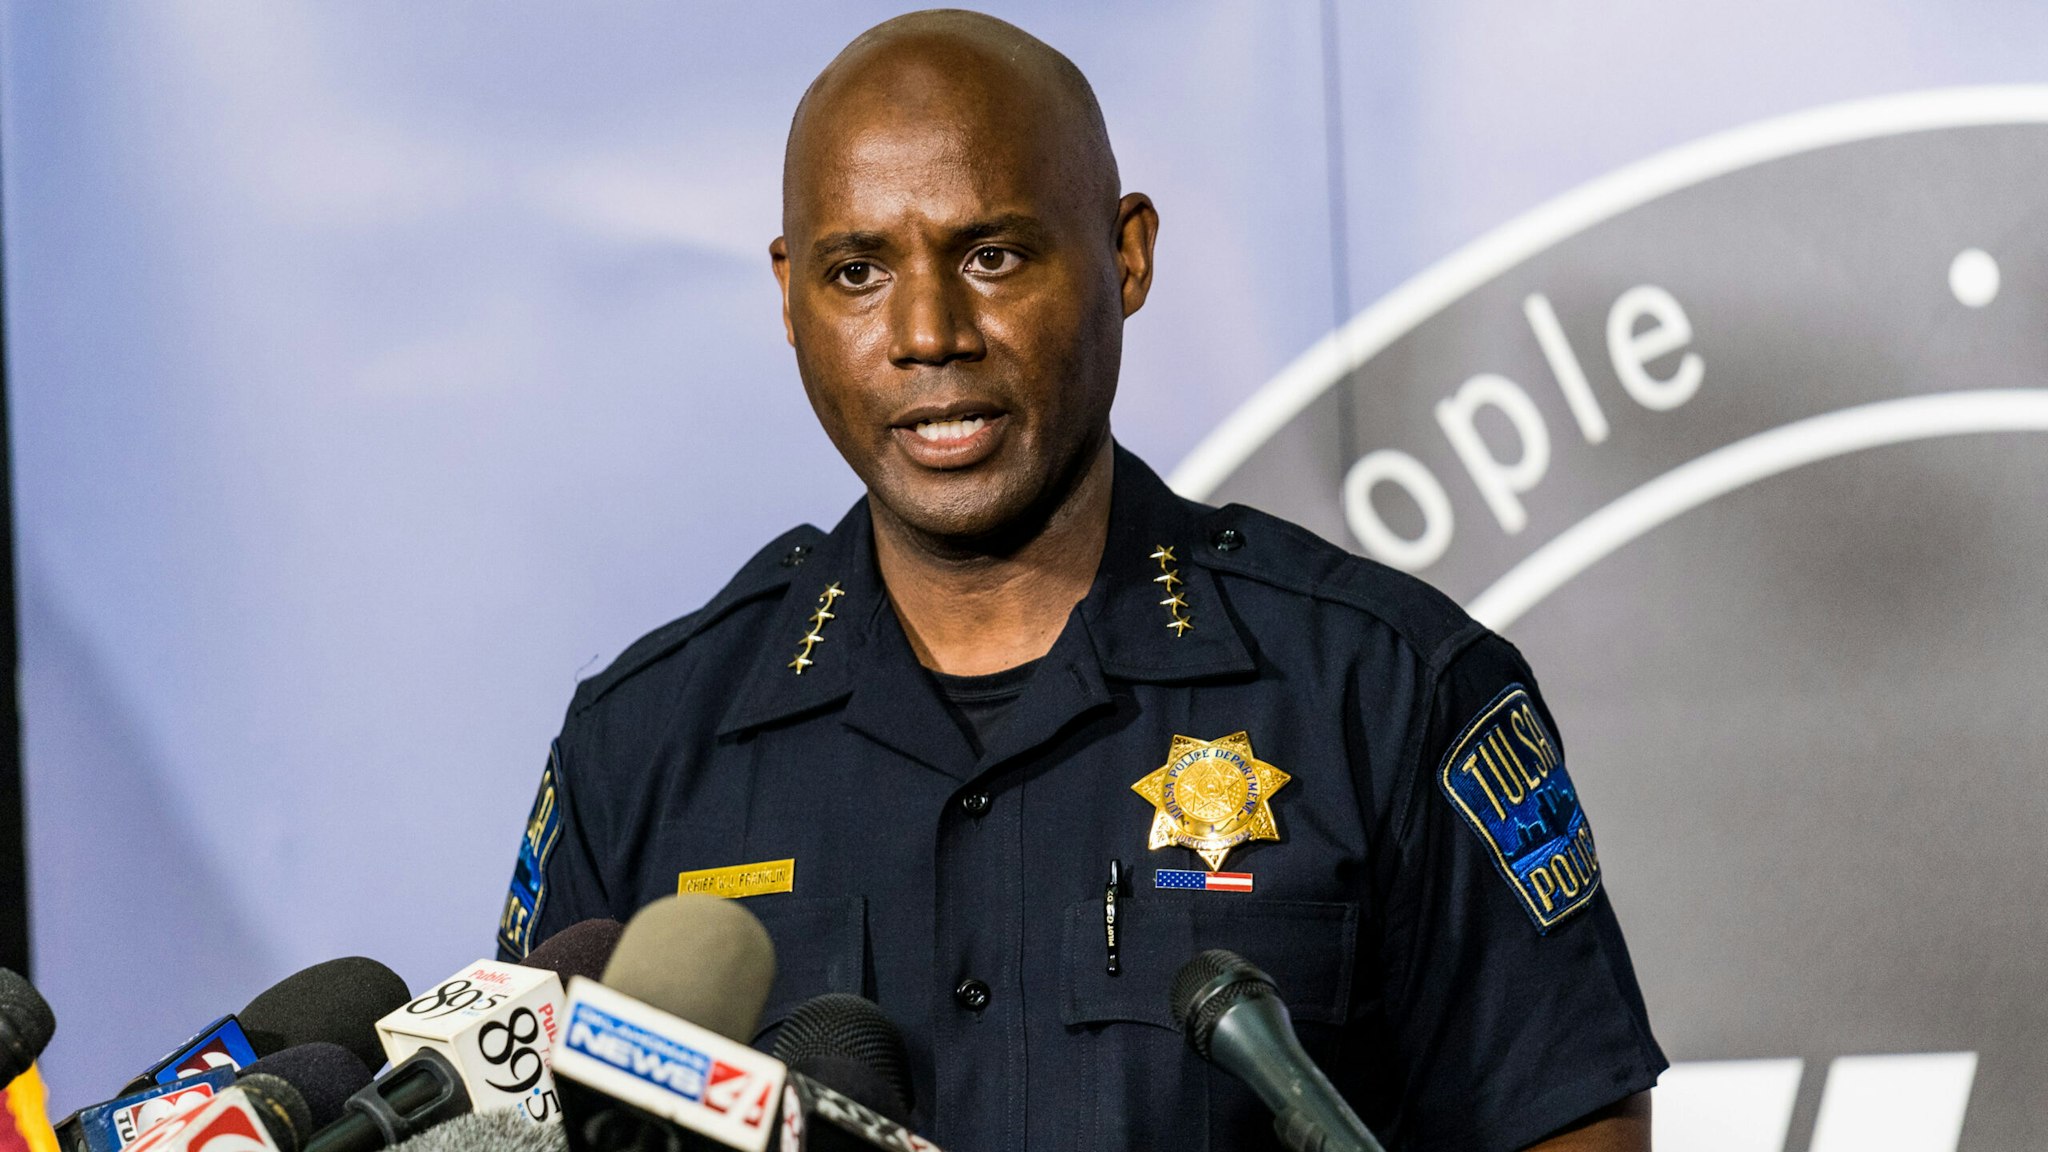 Wendell Franklin, chief of the Tulsa Police Department, speaks during a news conference in Tulsa, Oklahoma, U.S., on Wednesday, June 17, 2020. Bruce Dart, chief of Tulsa, Oklahoma, Health Department, said he had advised that President Trump's political rally set for Saturday be delayed until conditions were safer.